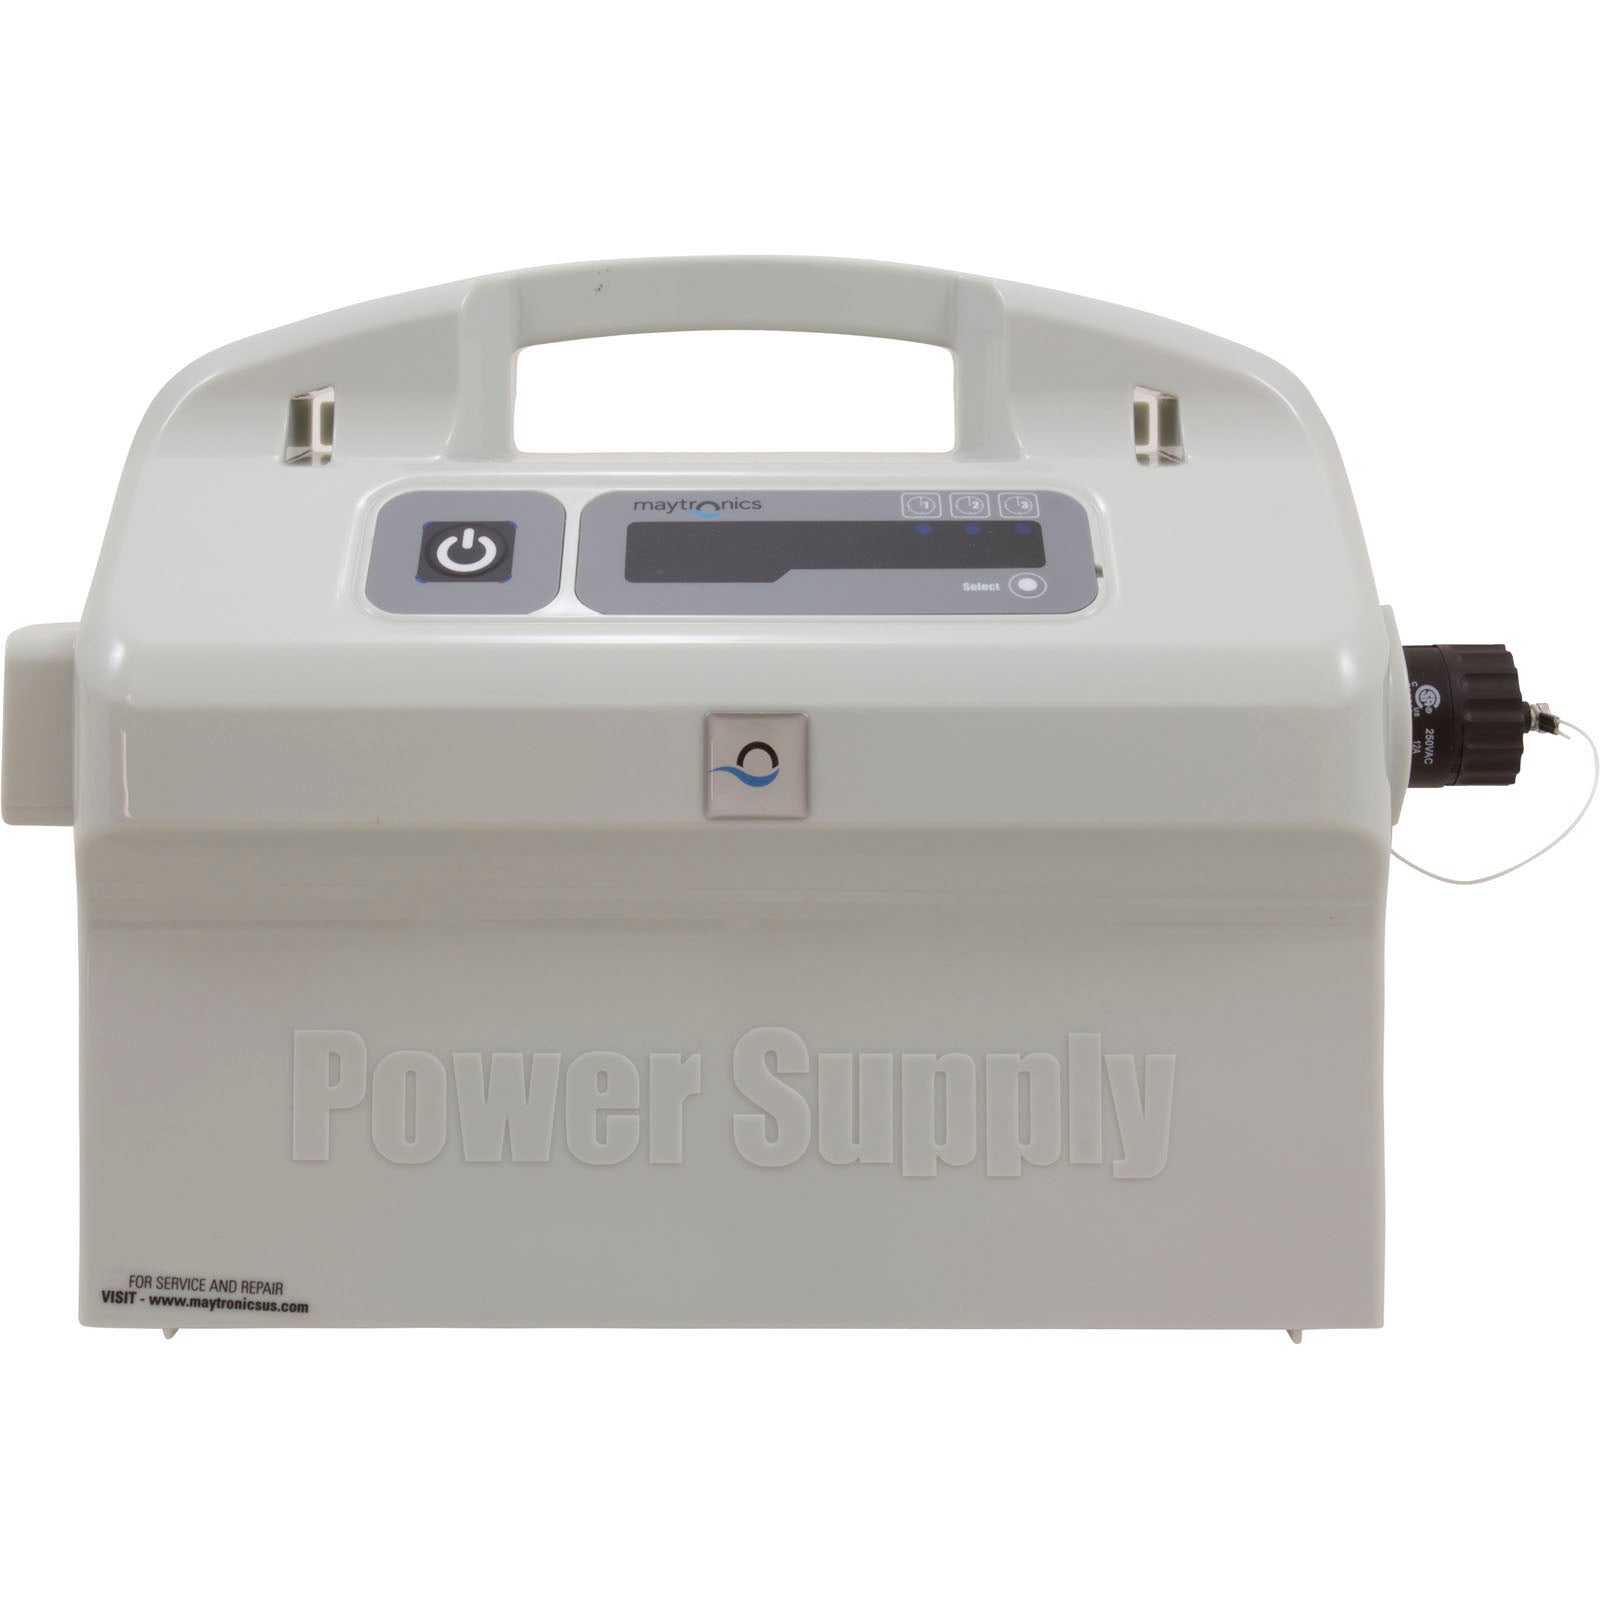 Power Supply and Timer, Maytronics 9995672-US-ASSY